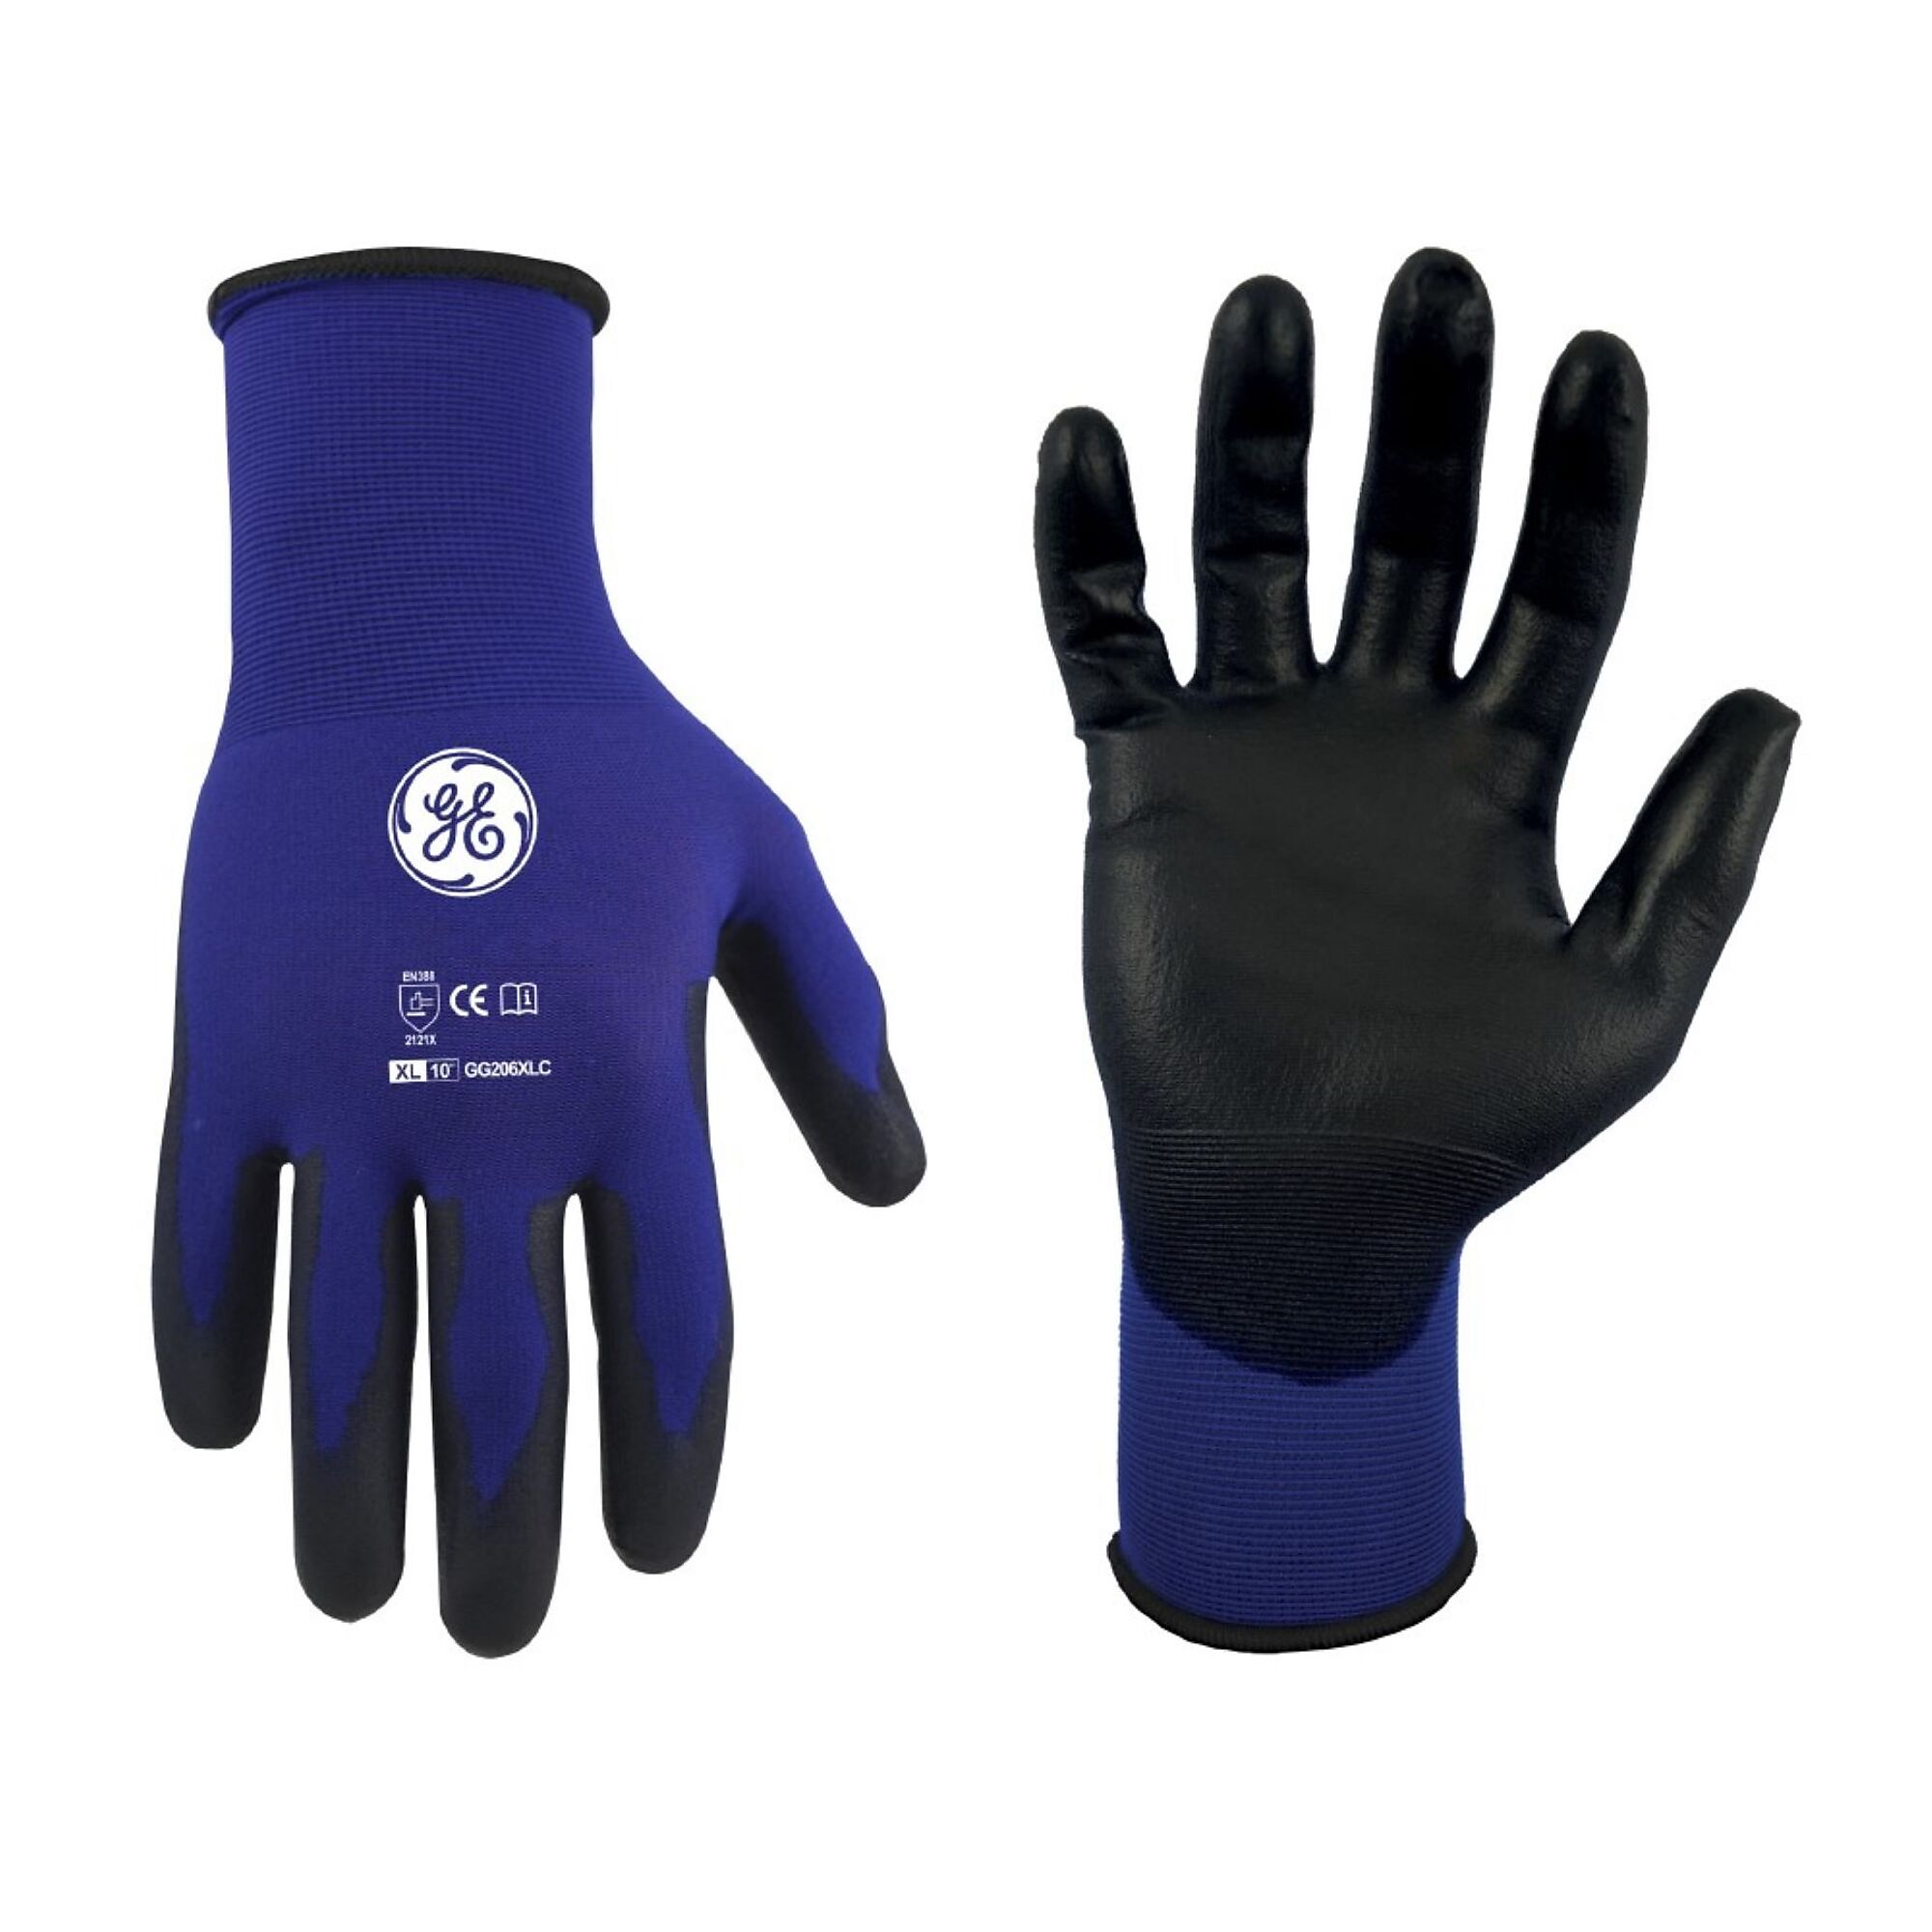 General Electric, Unisex Dipped Gloves Black/Blue XL 12 pair, Size XL, Included (qty.) 12, Model GG206XL